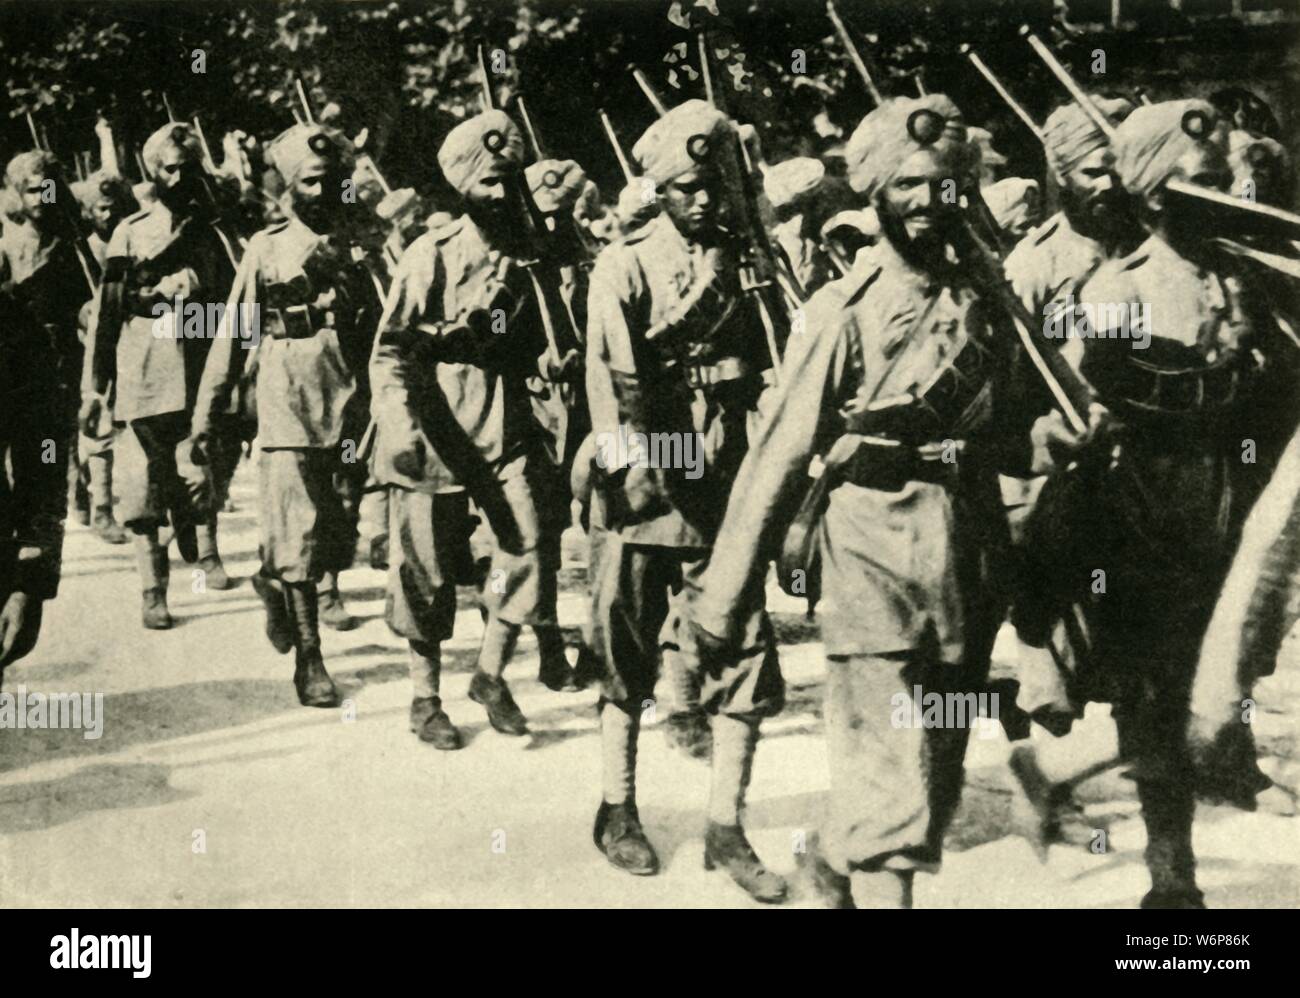 Indian soldiers in France, First World War, 1914, (c1920). A Sikh regiment on the march. Over one million Indian troops in the British Indian Army (of the Raj) fought in the European, Mediterranean and the Middle East theatres of war. At least 74,187 Indian soldiers died, with 67,000 wounded. From &quot;The Great World War - A History&quot; Volume I, edited by Frank A Mumby. [The Gresham Publishing Company Ltd, London, c1920] Stock Photo